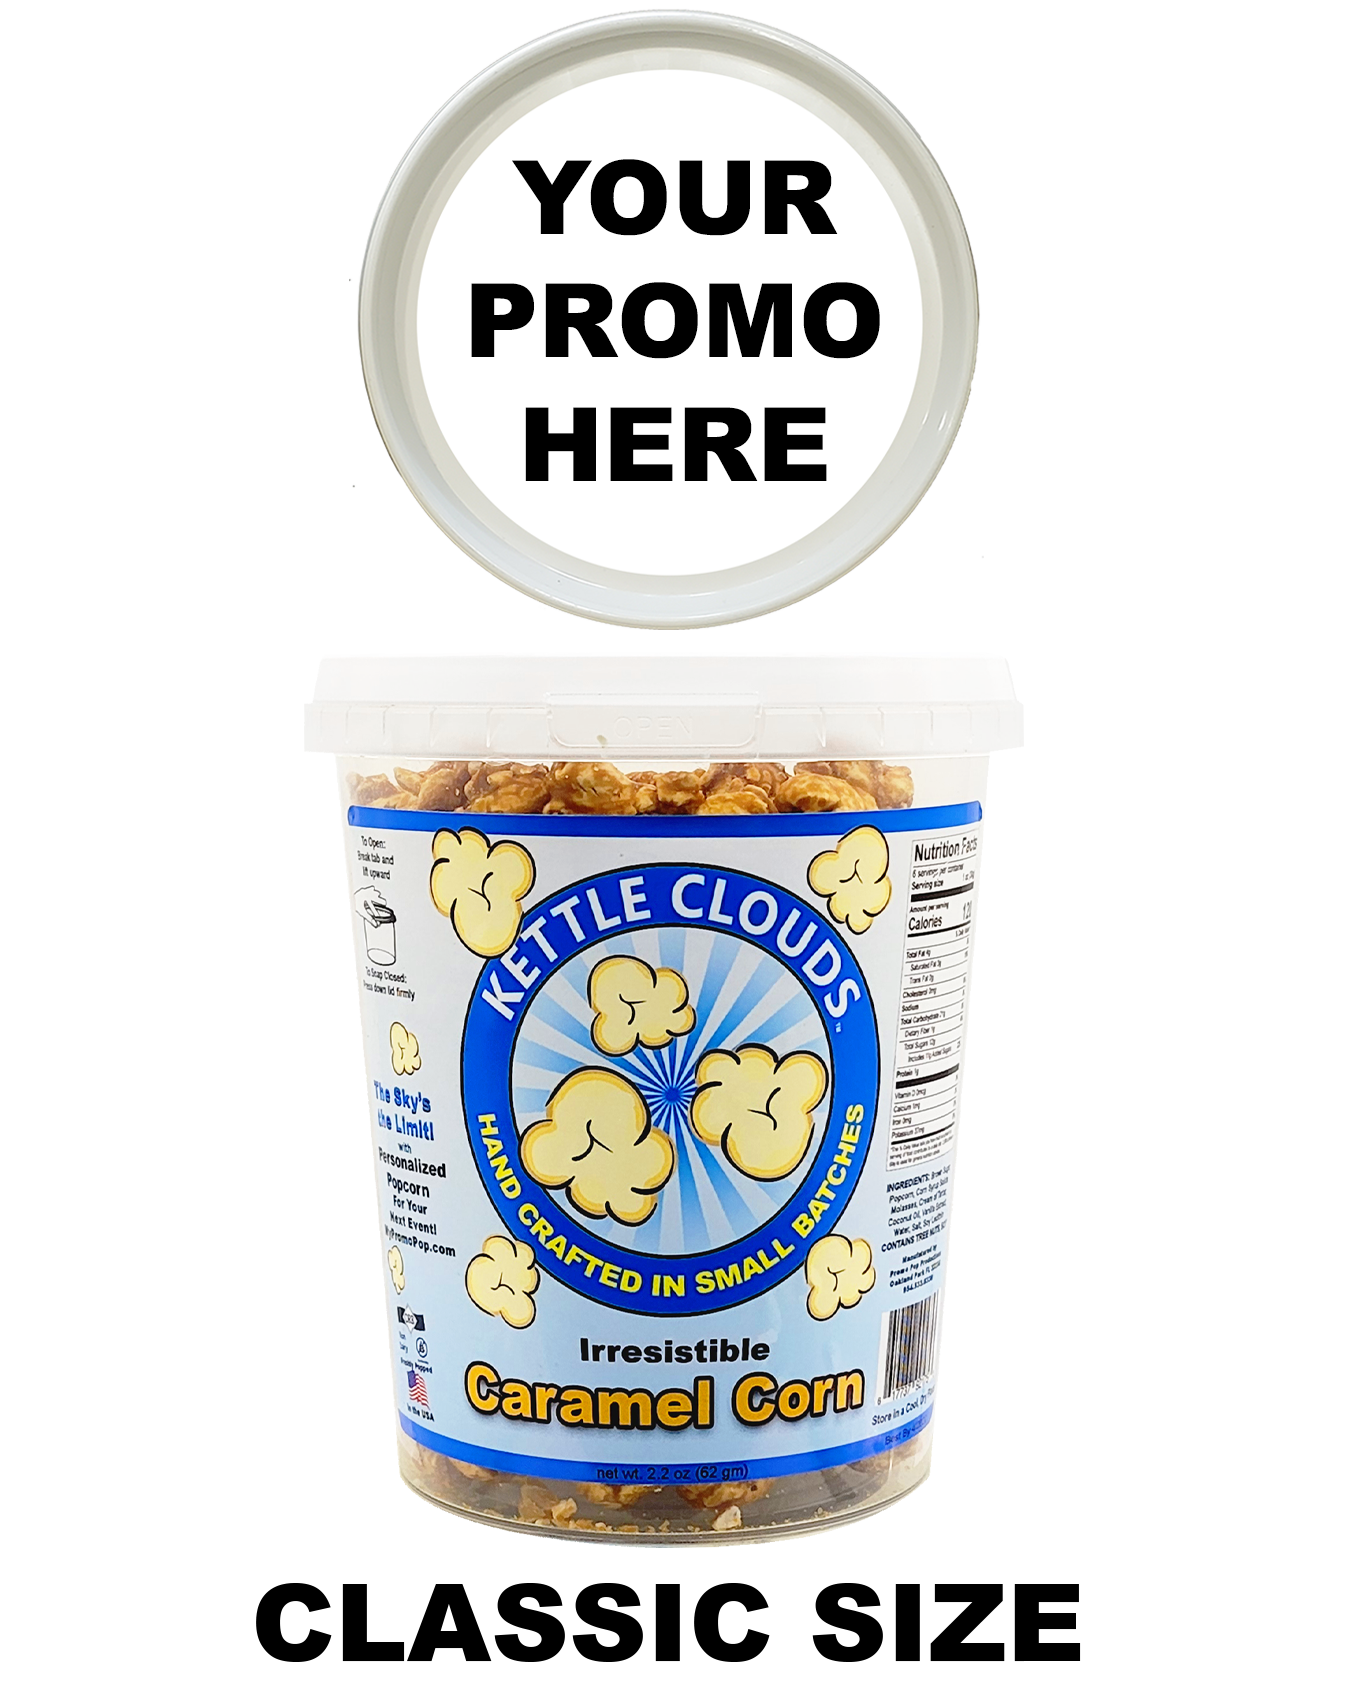 Kettle Clouds™ - Caramel Corn Classic (as low as $4.49 per bucket) Case of 12 Price